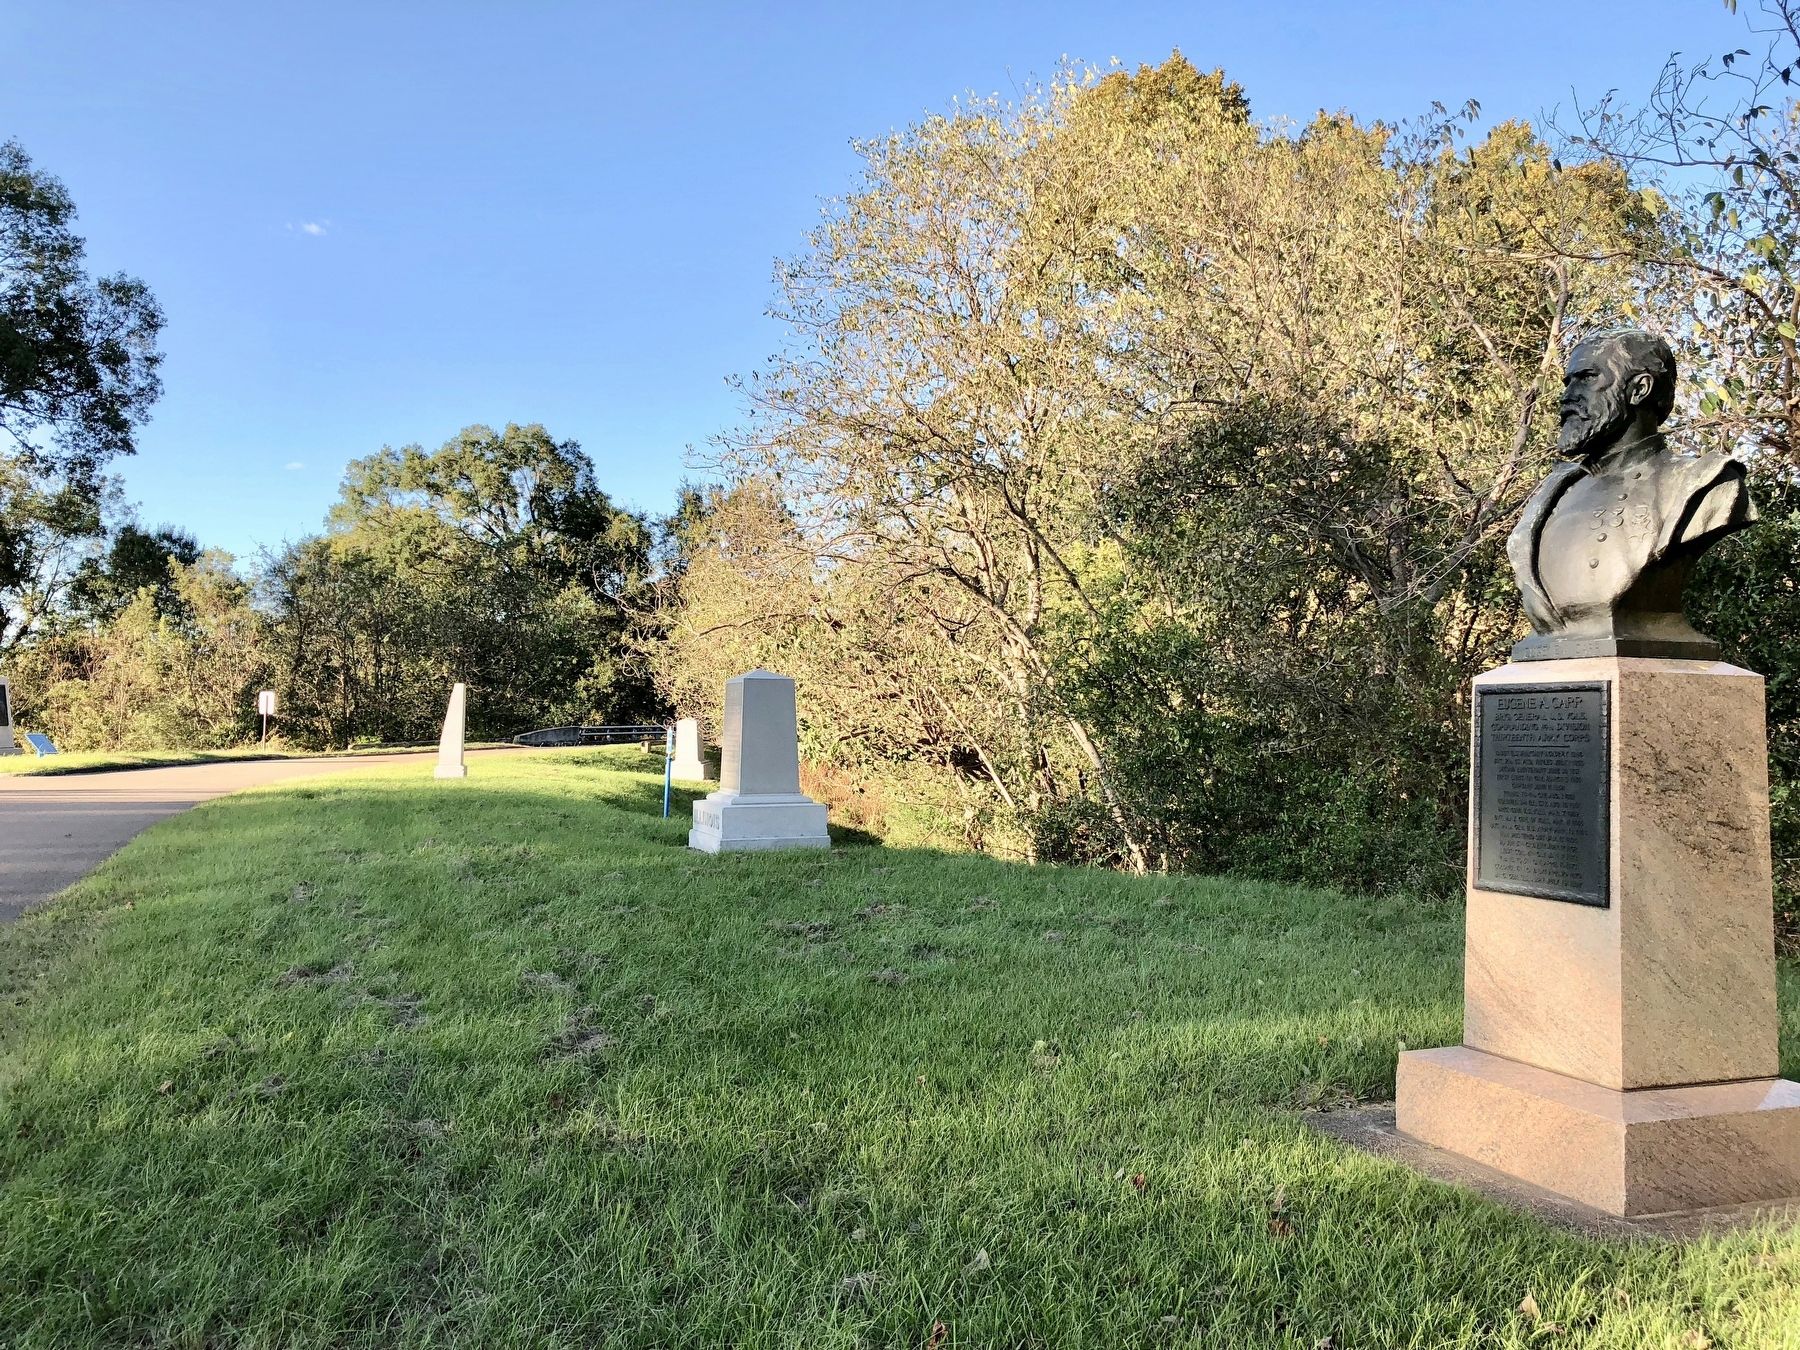 Illinois 33D Infantry Marker can be seen just beyond the bust. image. Click for full size.